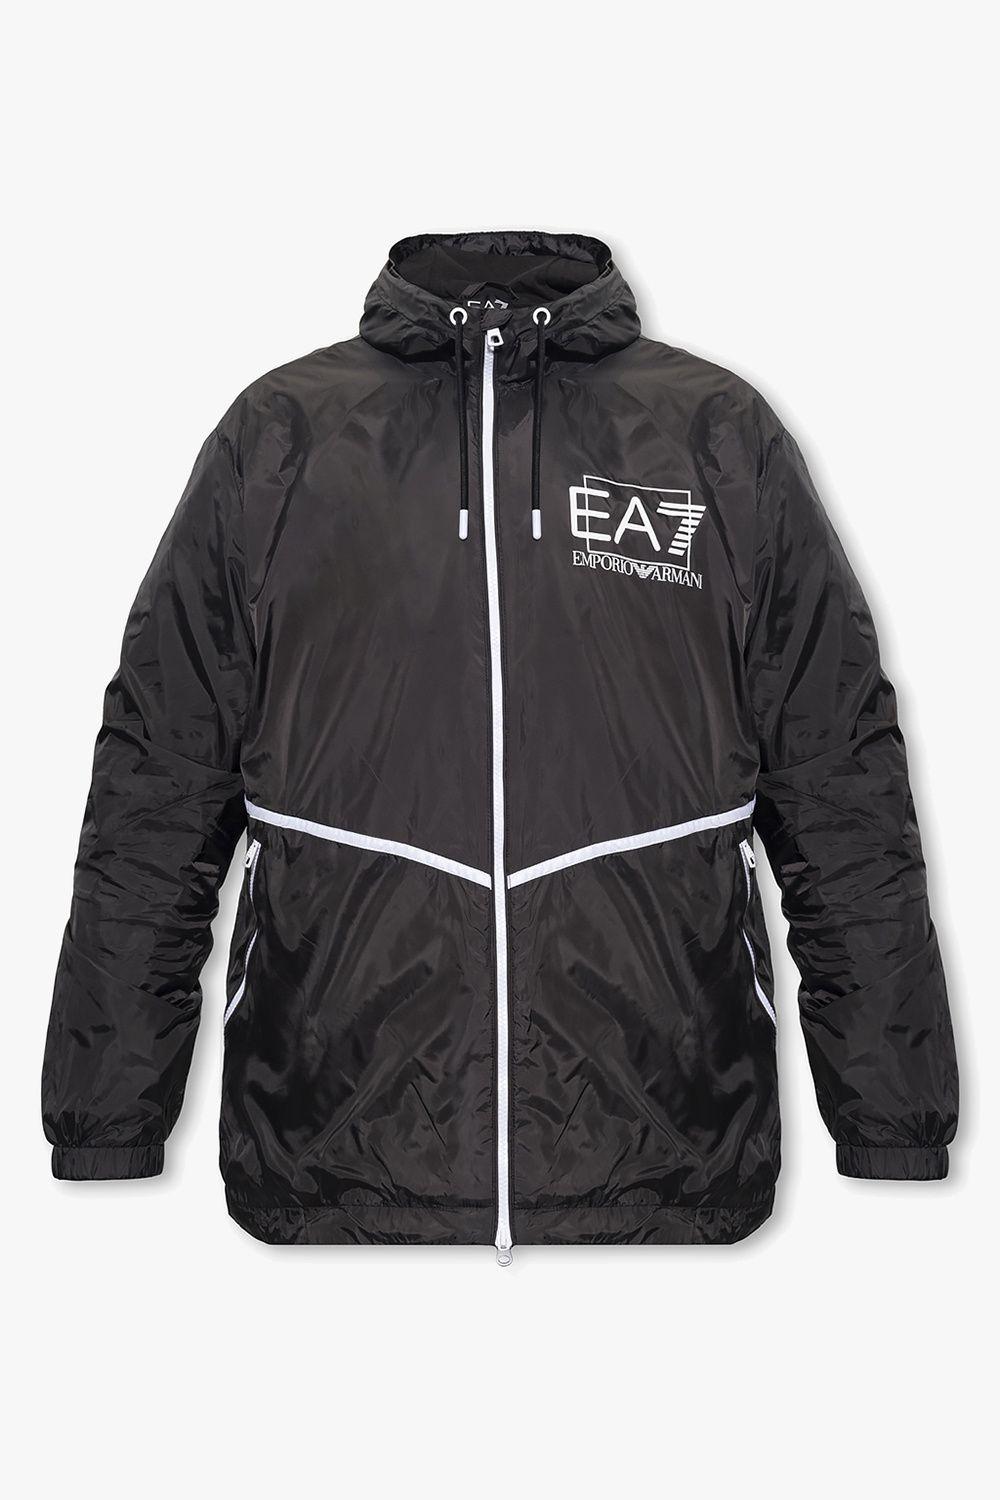 EA7 'sustainable' Collection Jacket in Black for Men | Lyst